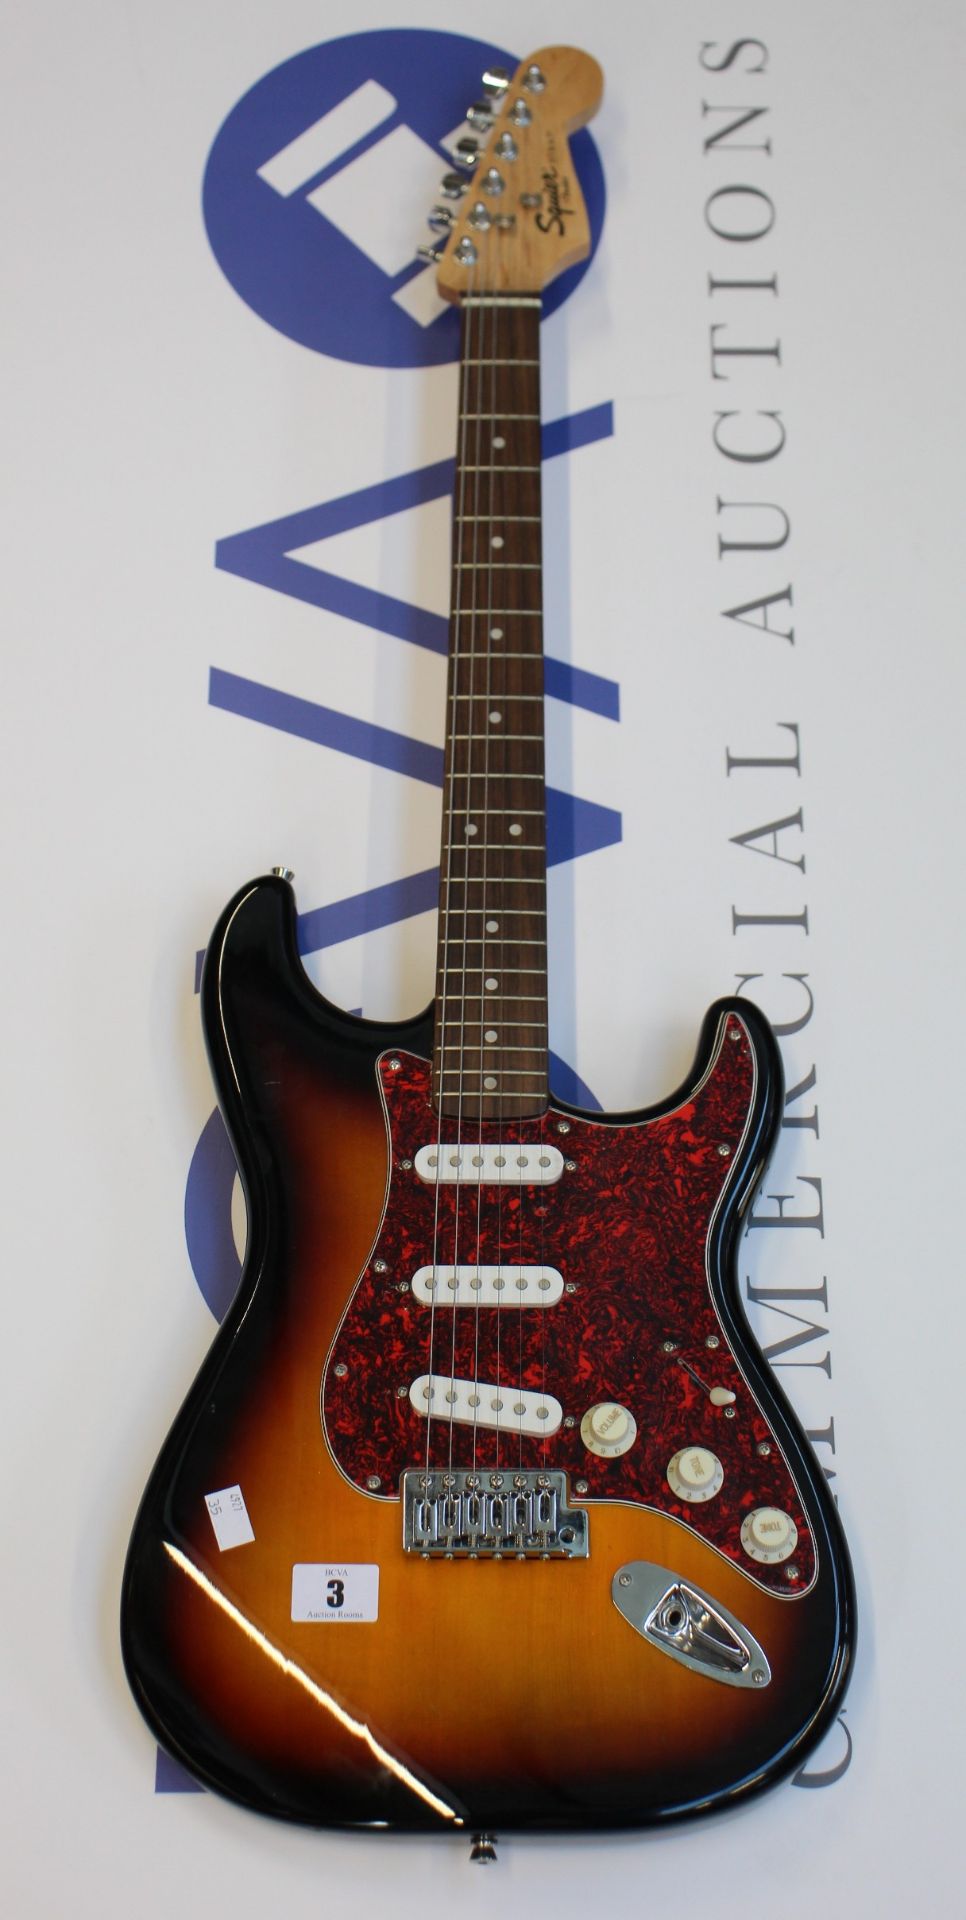 A pre-owned Fender Affinity Series Stratocaster electric guitar.